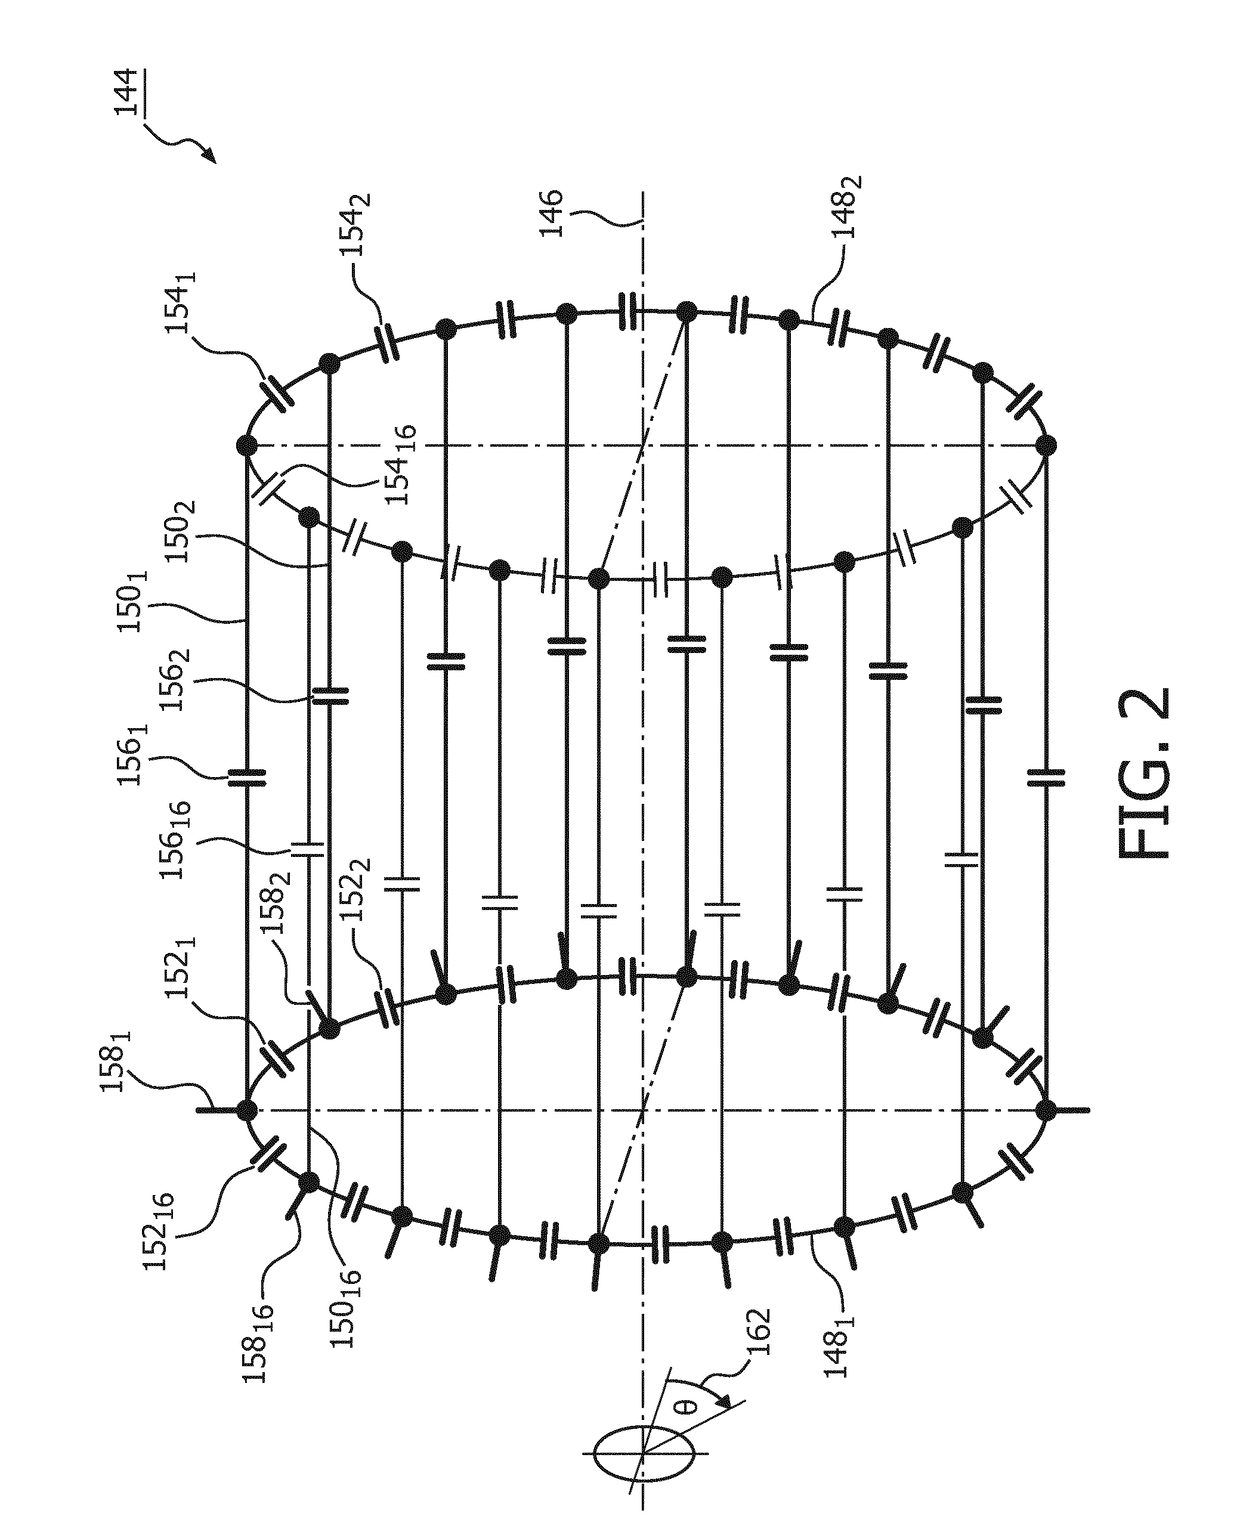 MRI birdcage coil with distributed excitation